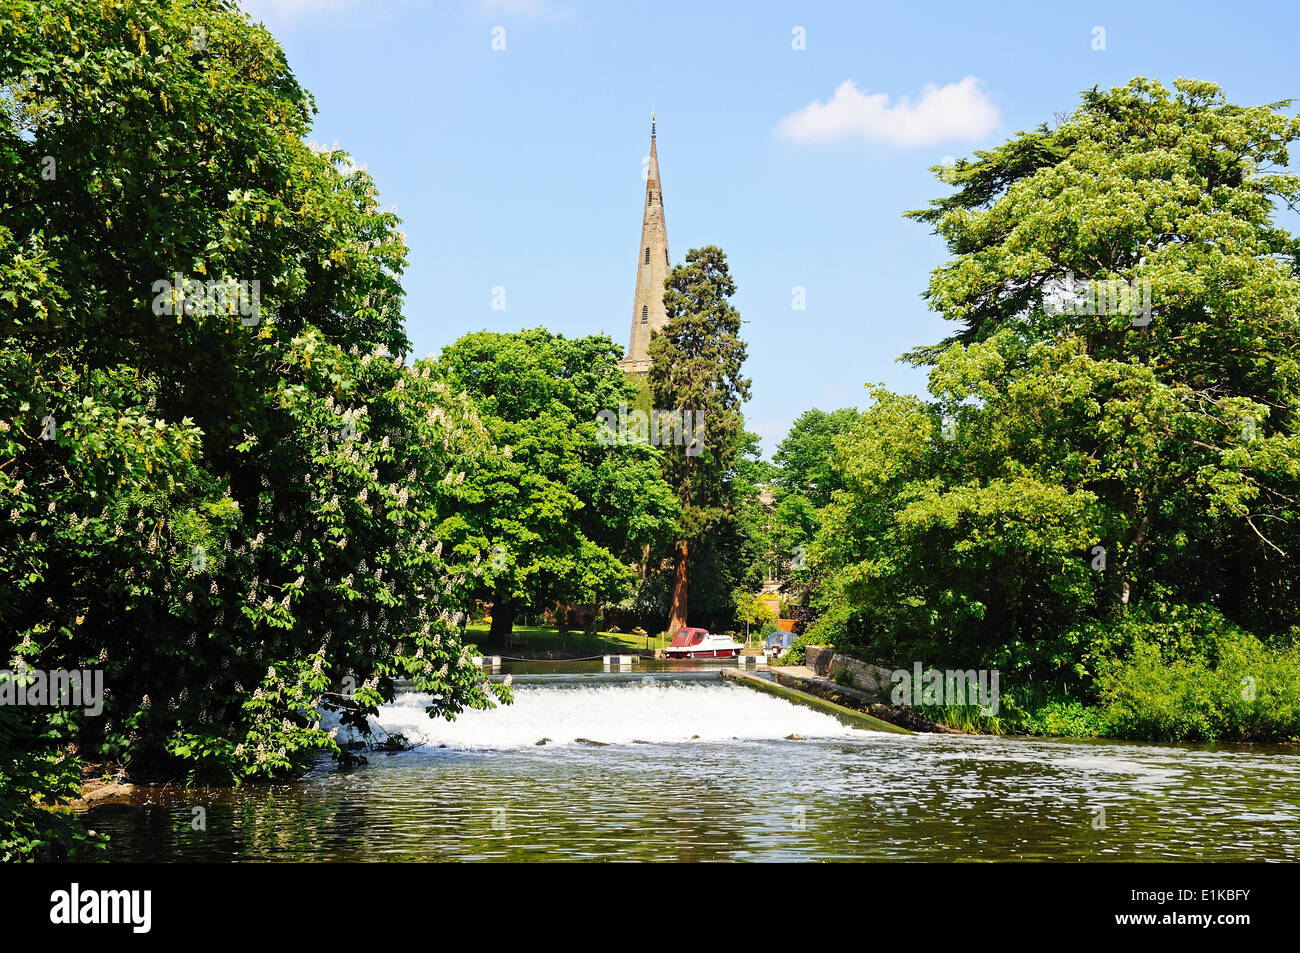 Weir along the River Avon with the Holy Trinity Church spire to the rear, Stratford-Upon-Avon, England, UK, Western Europe. Stock Photo